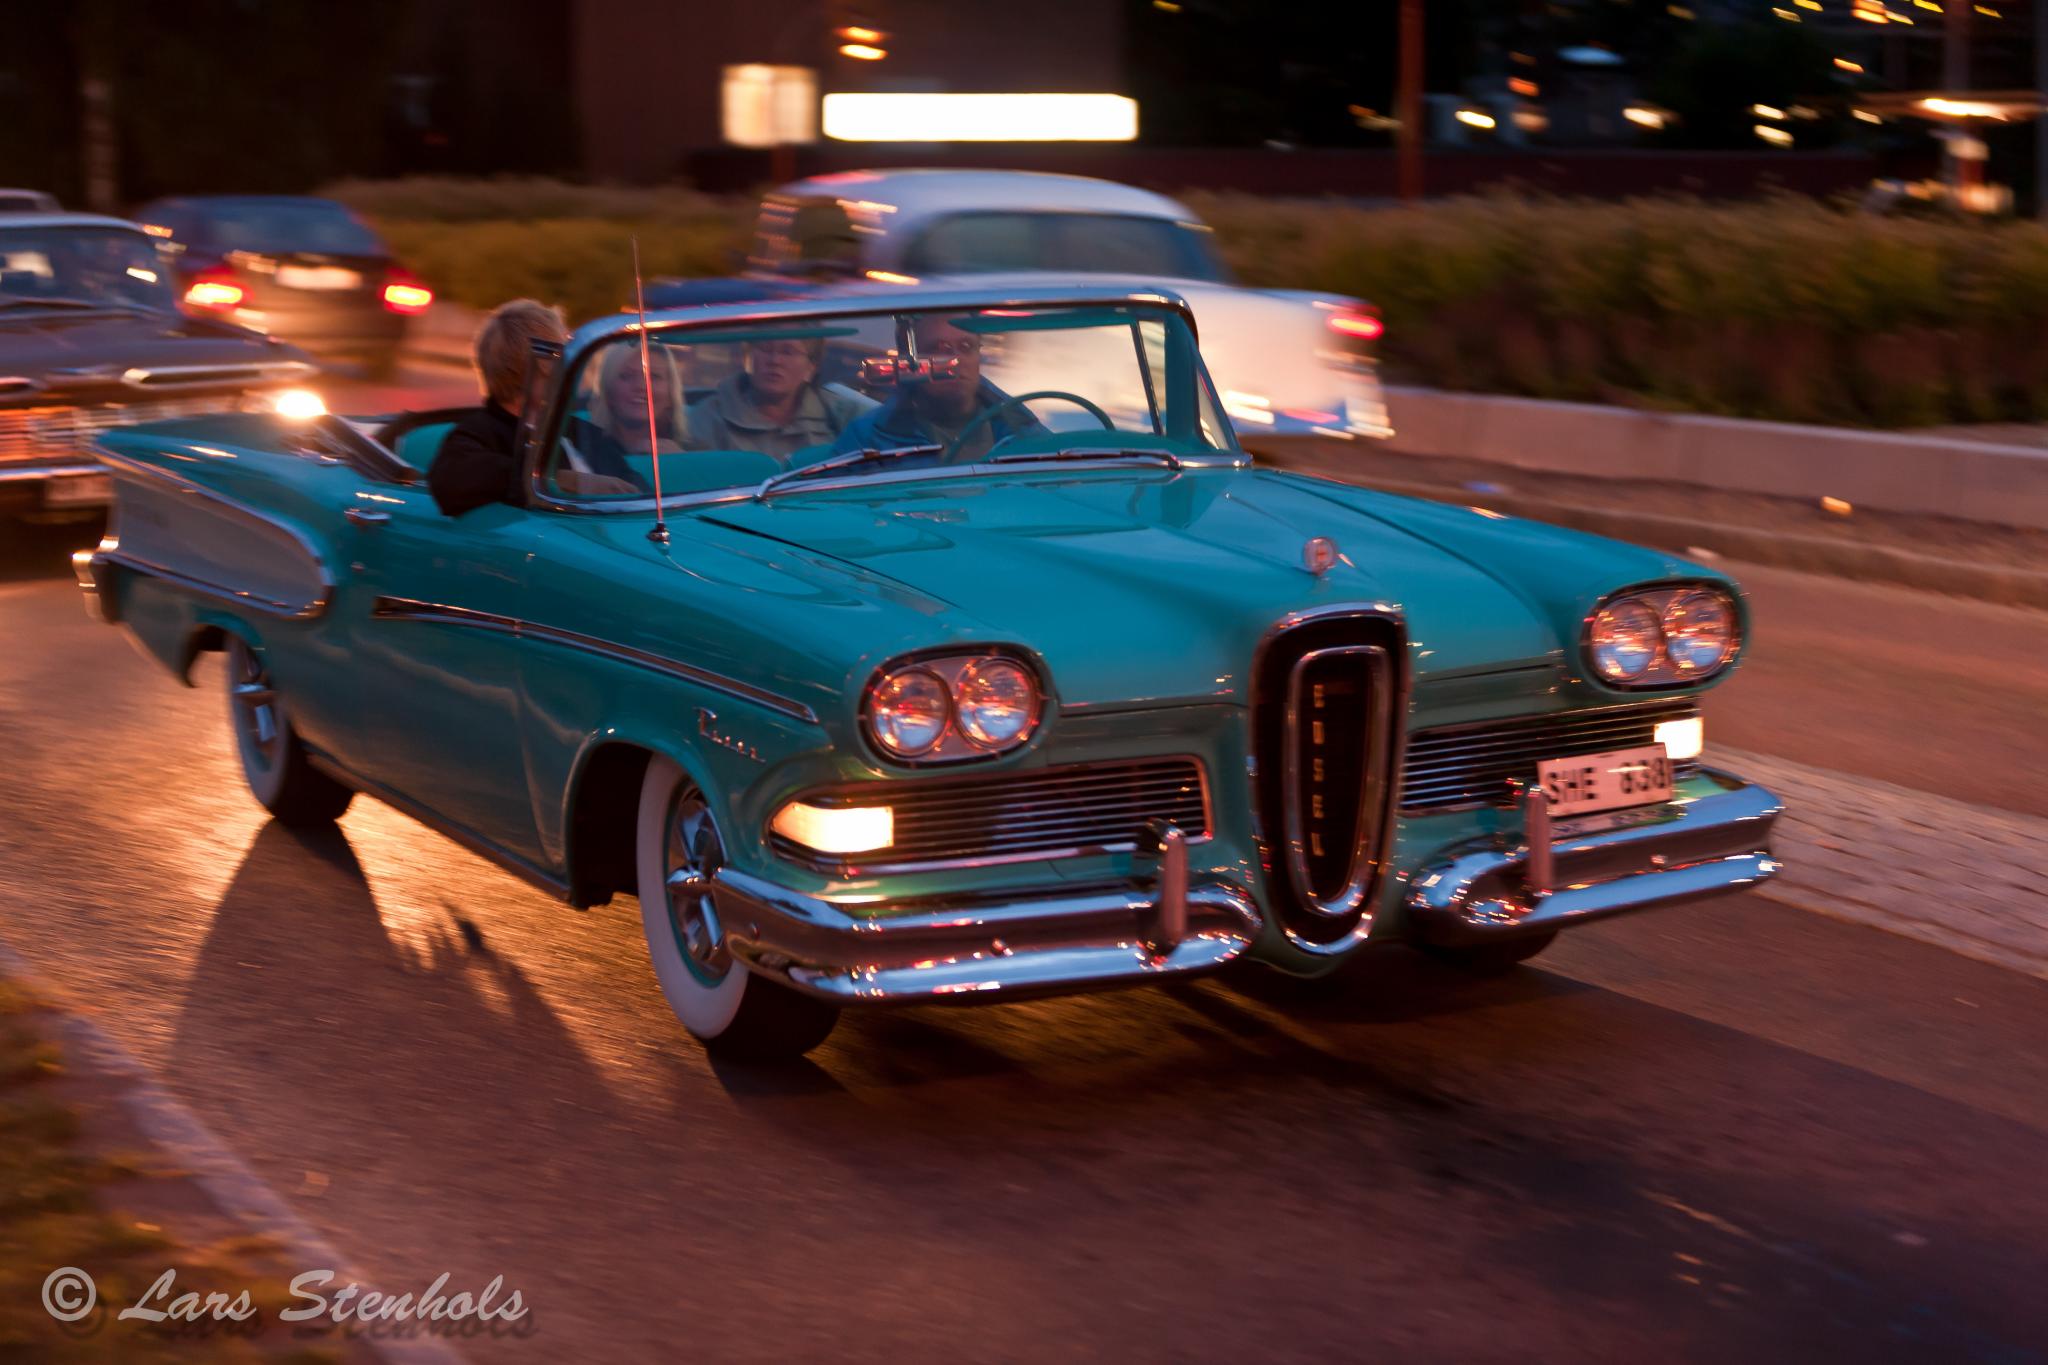 Ford Edsel Pacer Convertible -58 | Flickr - Photo Sharing!